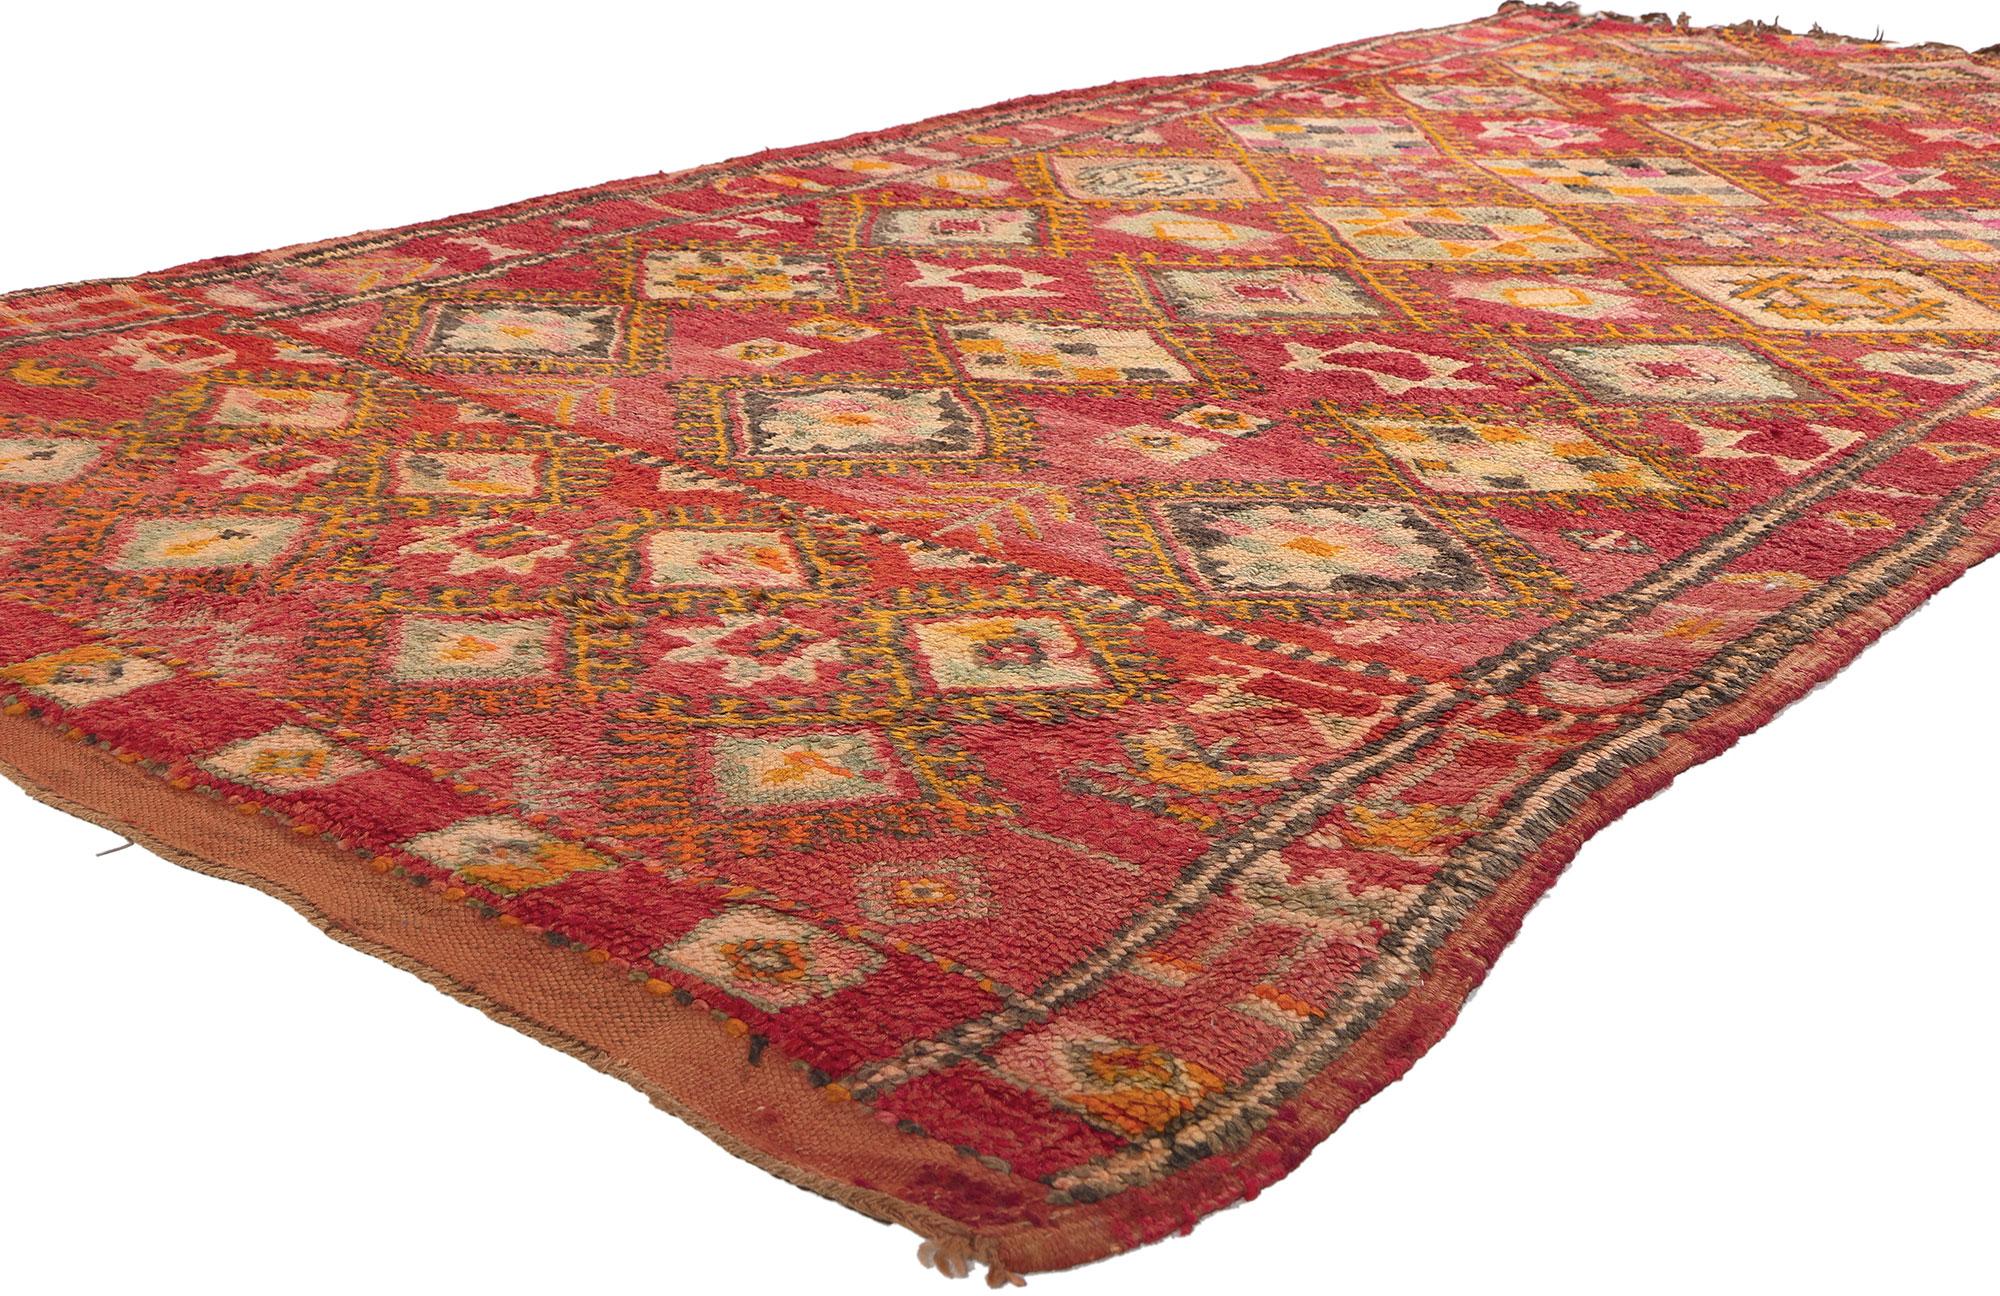 21344 Vintage Red Boujad Moroccan Rug, 05'04 x 10'08. Embrace the vibrant essence of Boujad rugs, hailing from the Khouribga region in the Mid Atlas Mountains, are renowned for their eccentric and artistic designs. In this vintage Boujad Moroccan